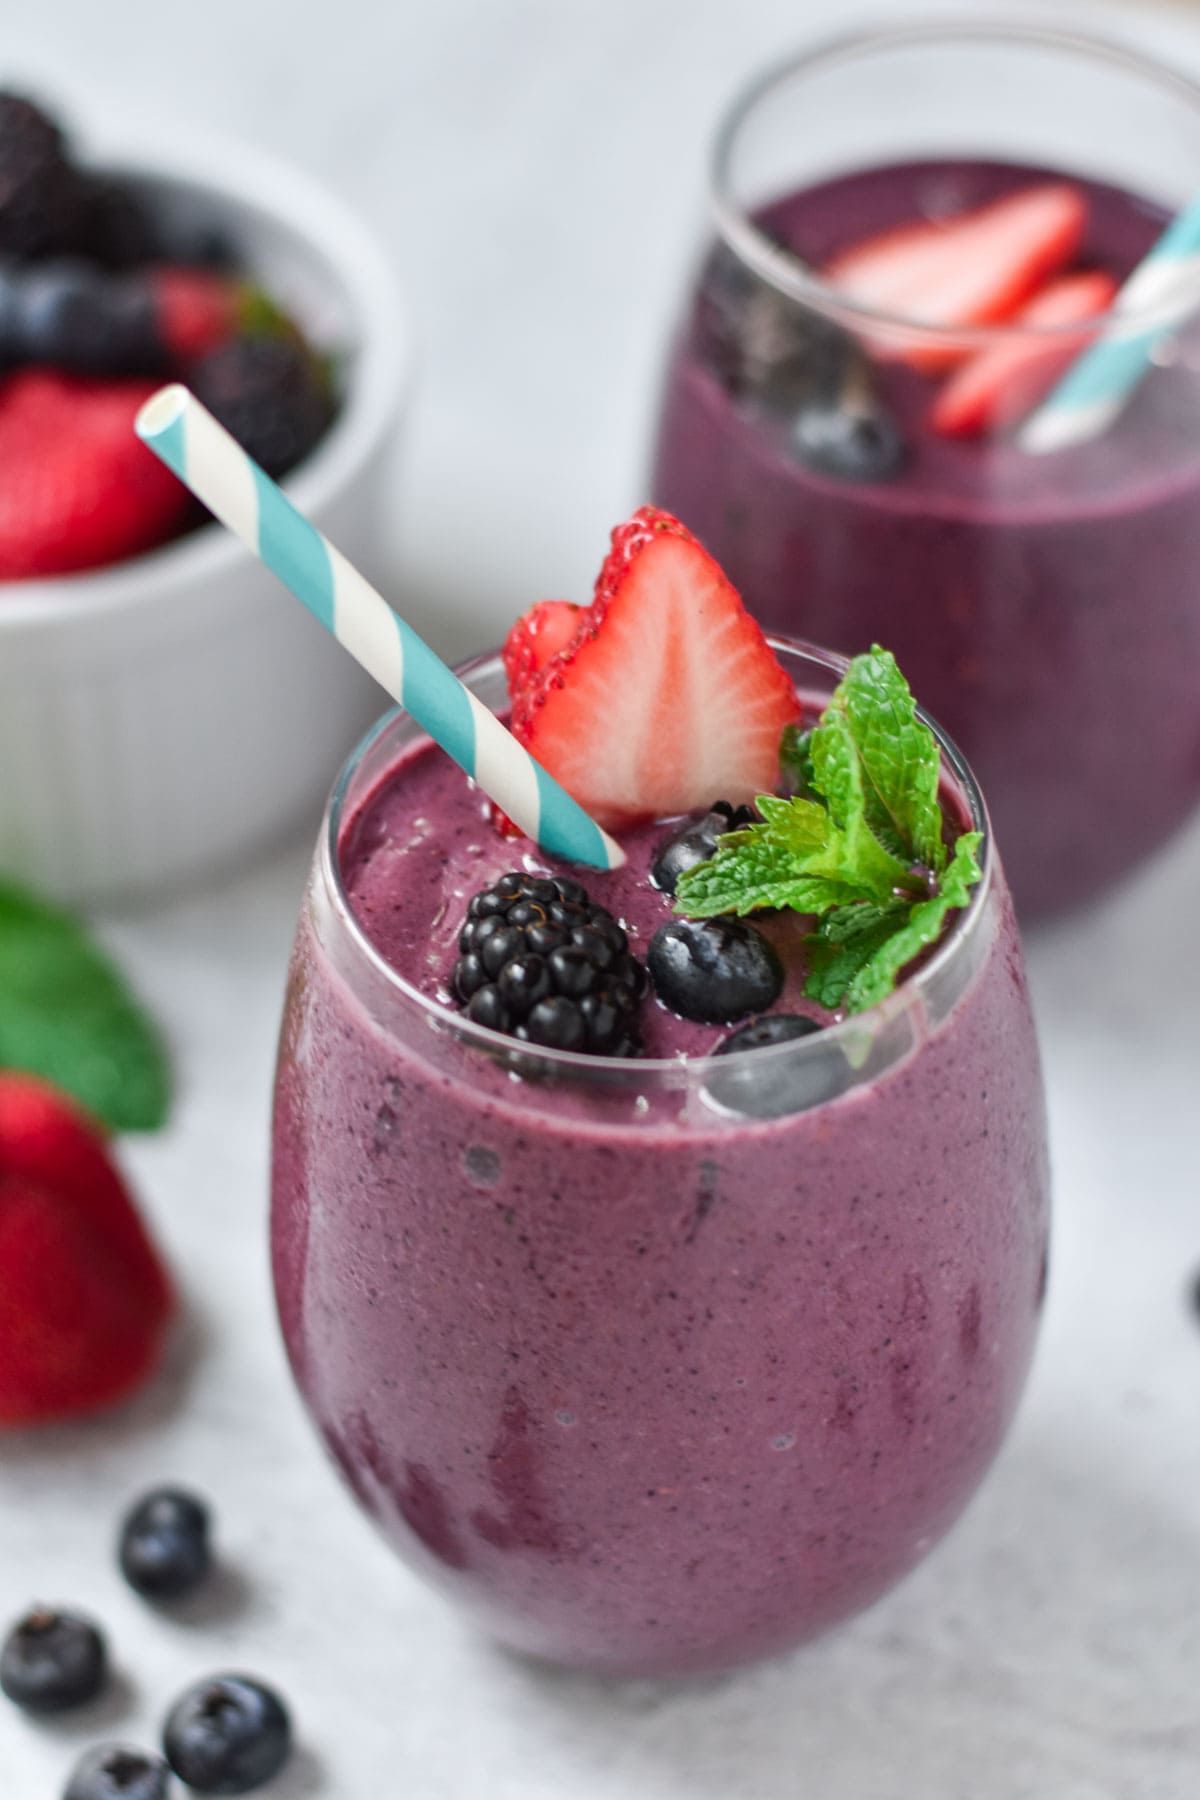 Two berry smoothies next to a bowl of mixed berries.